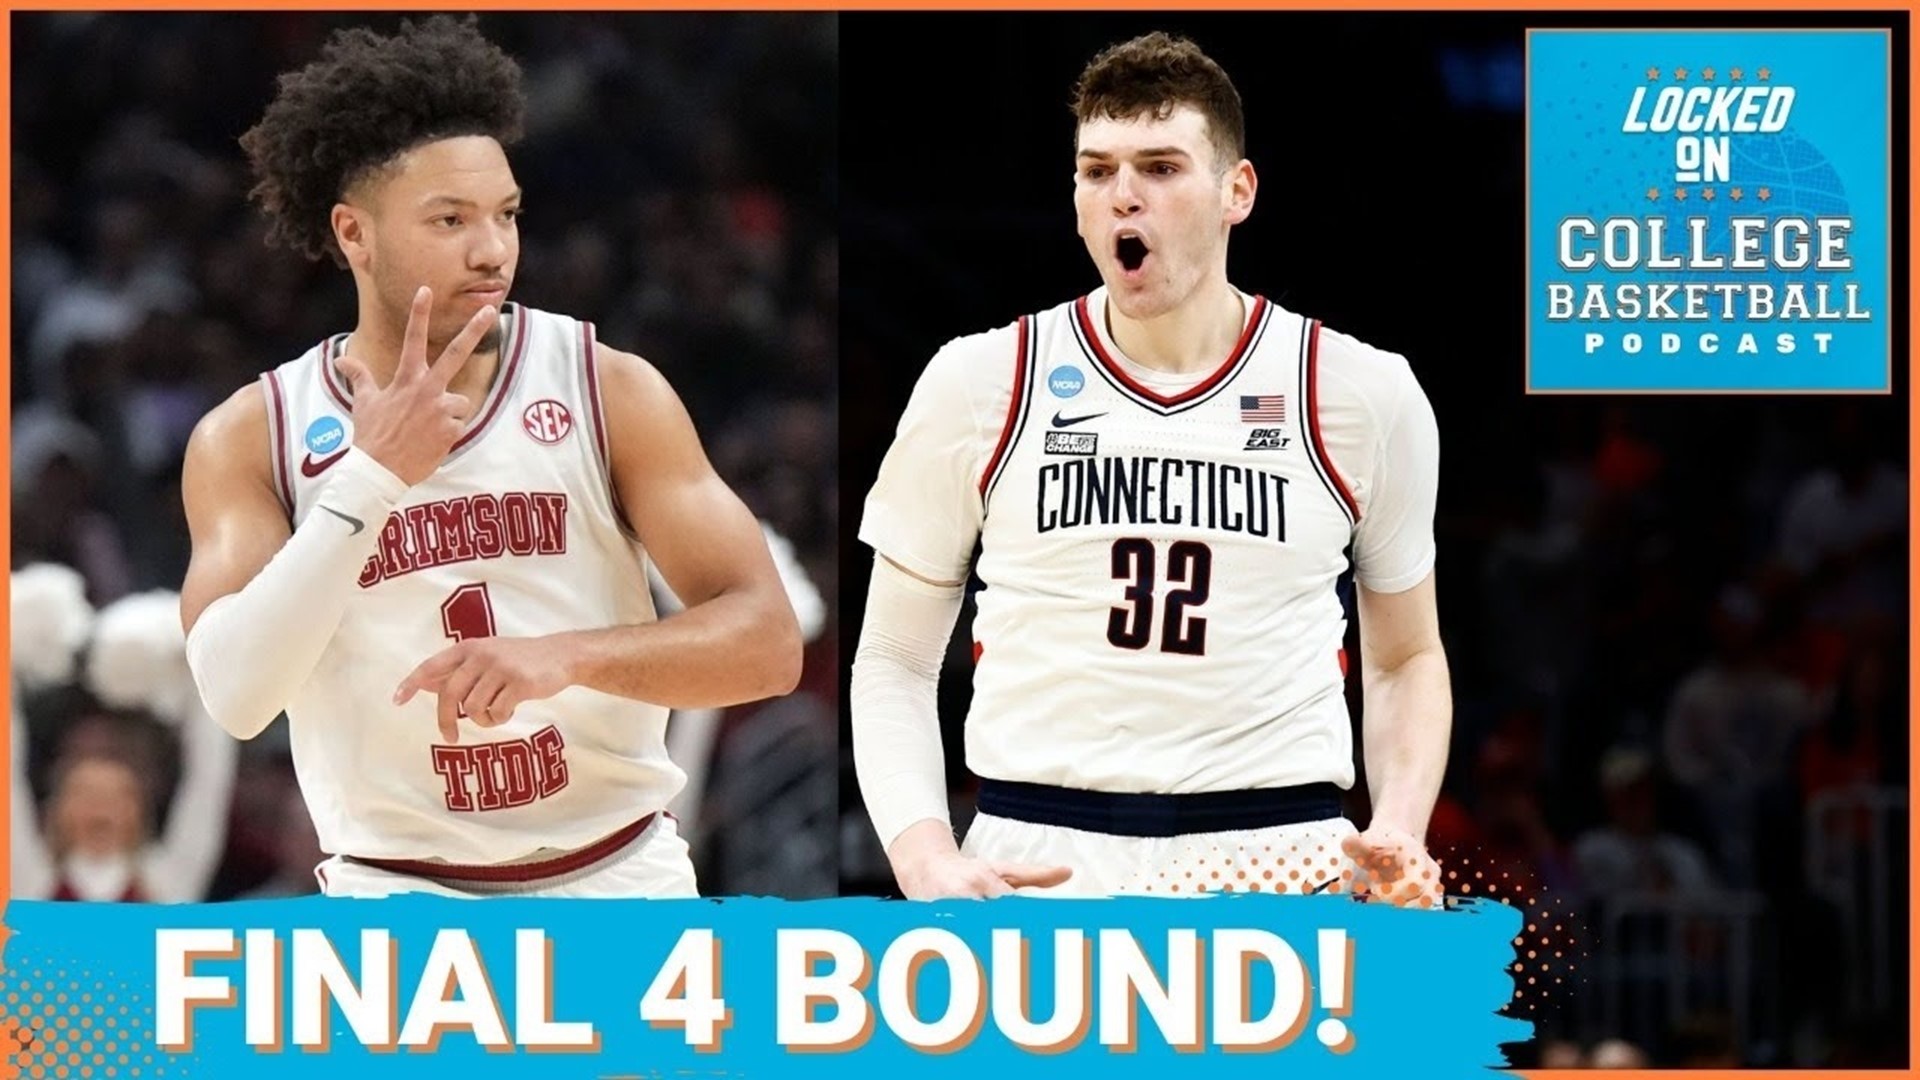 UConn punched their 2nd straight ticked to the #Final4 thanks to a 30-0 run that completely changed the tenor of a tie game.